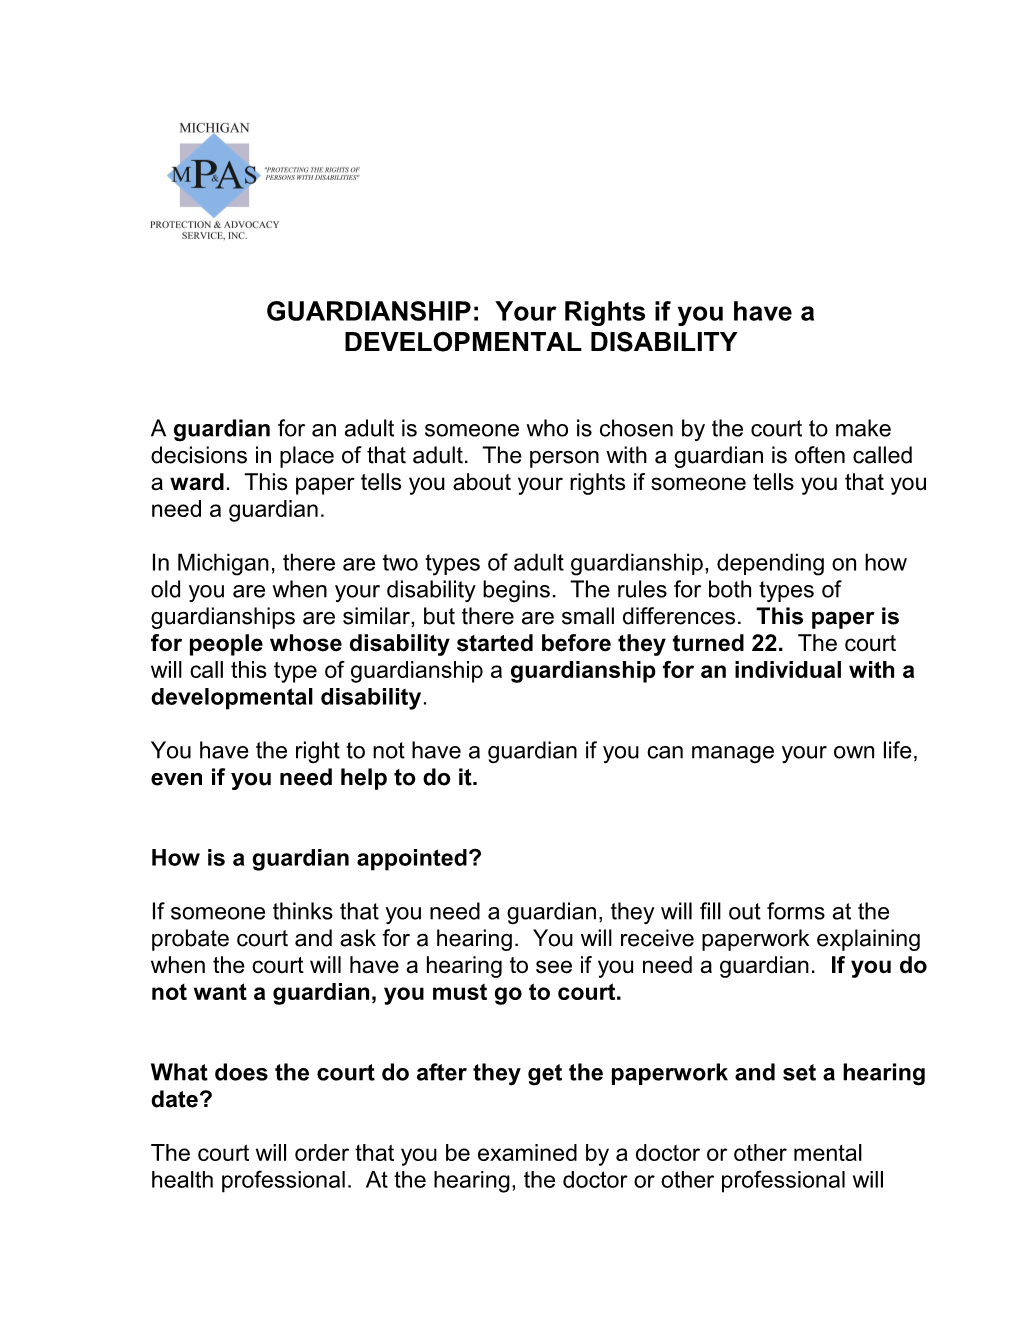 GUARDIANSHIP: Your Rights If You Have a DEVELOPMENTAL DISABILITY